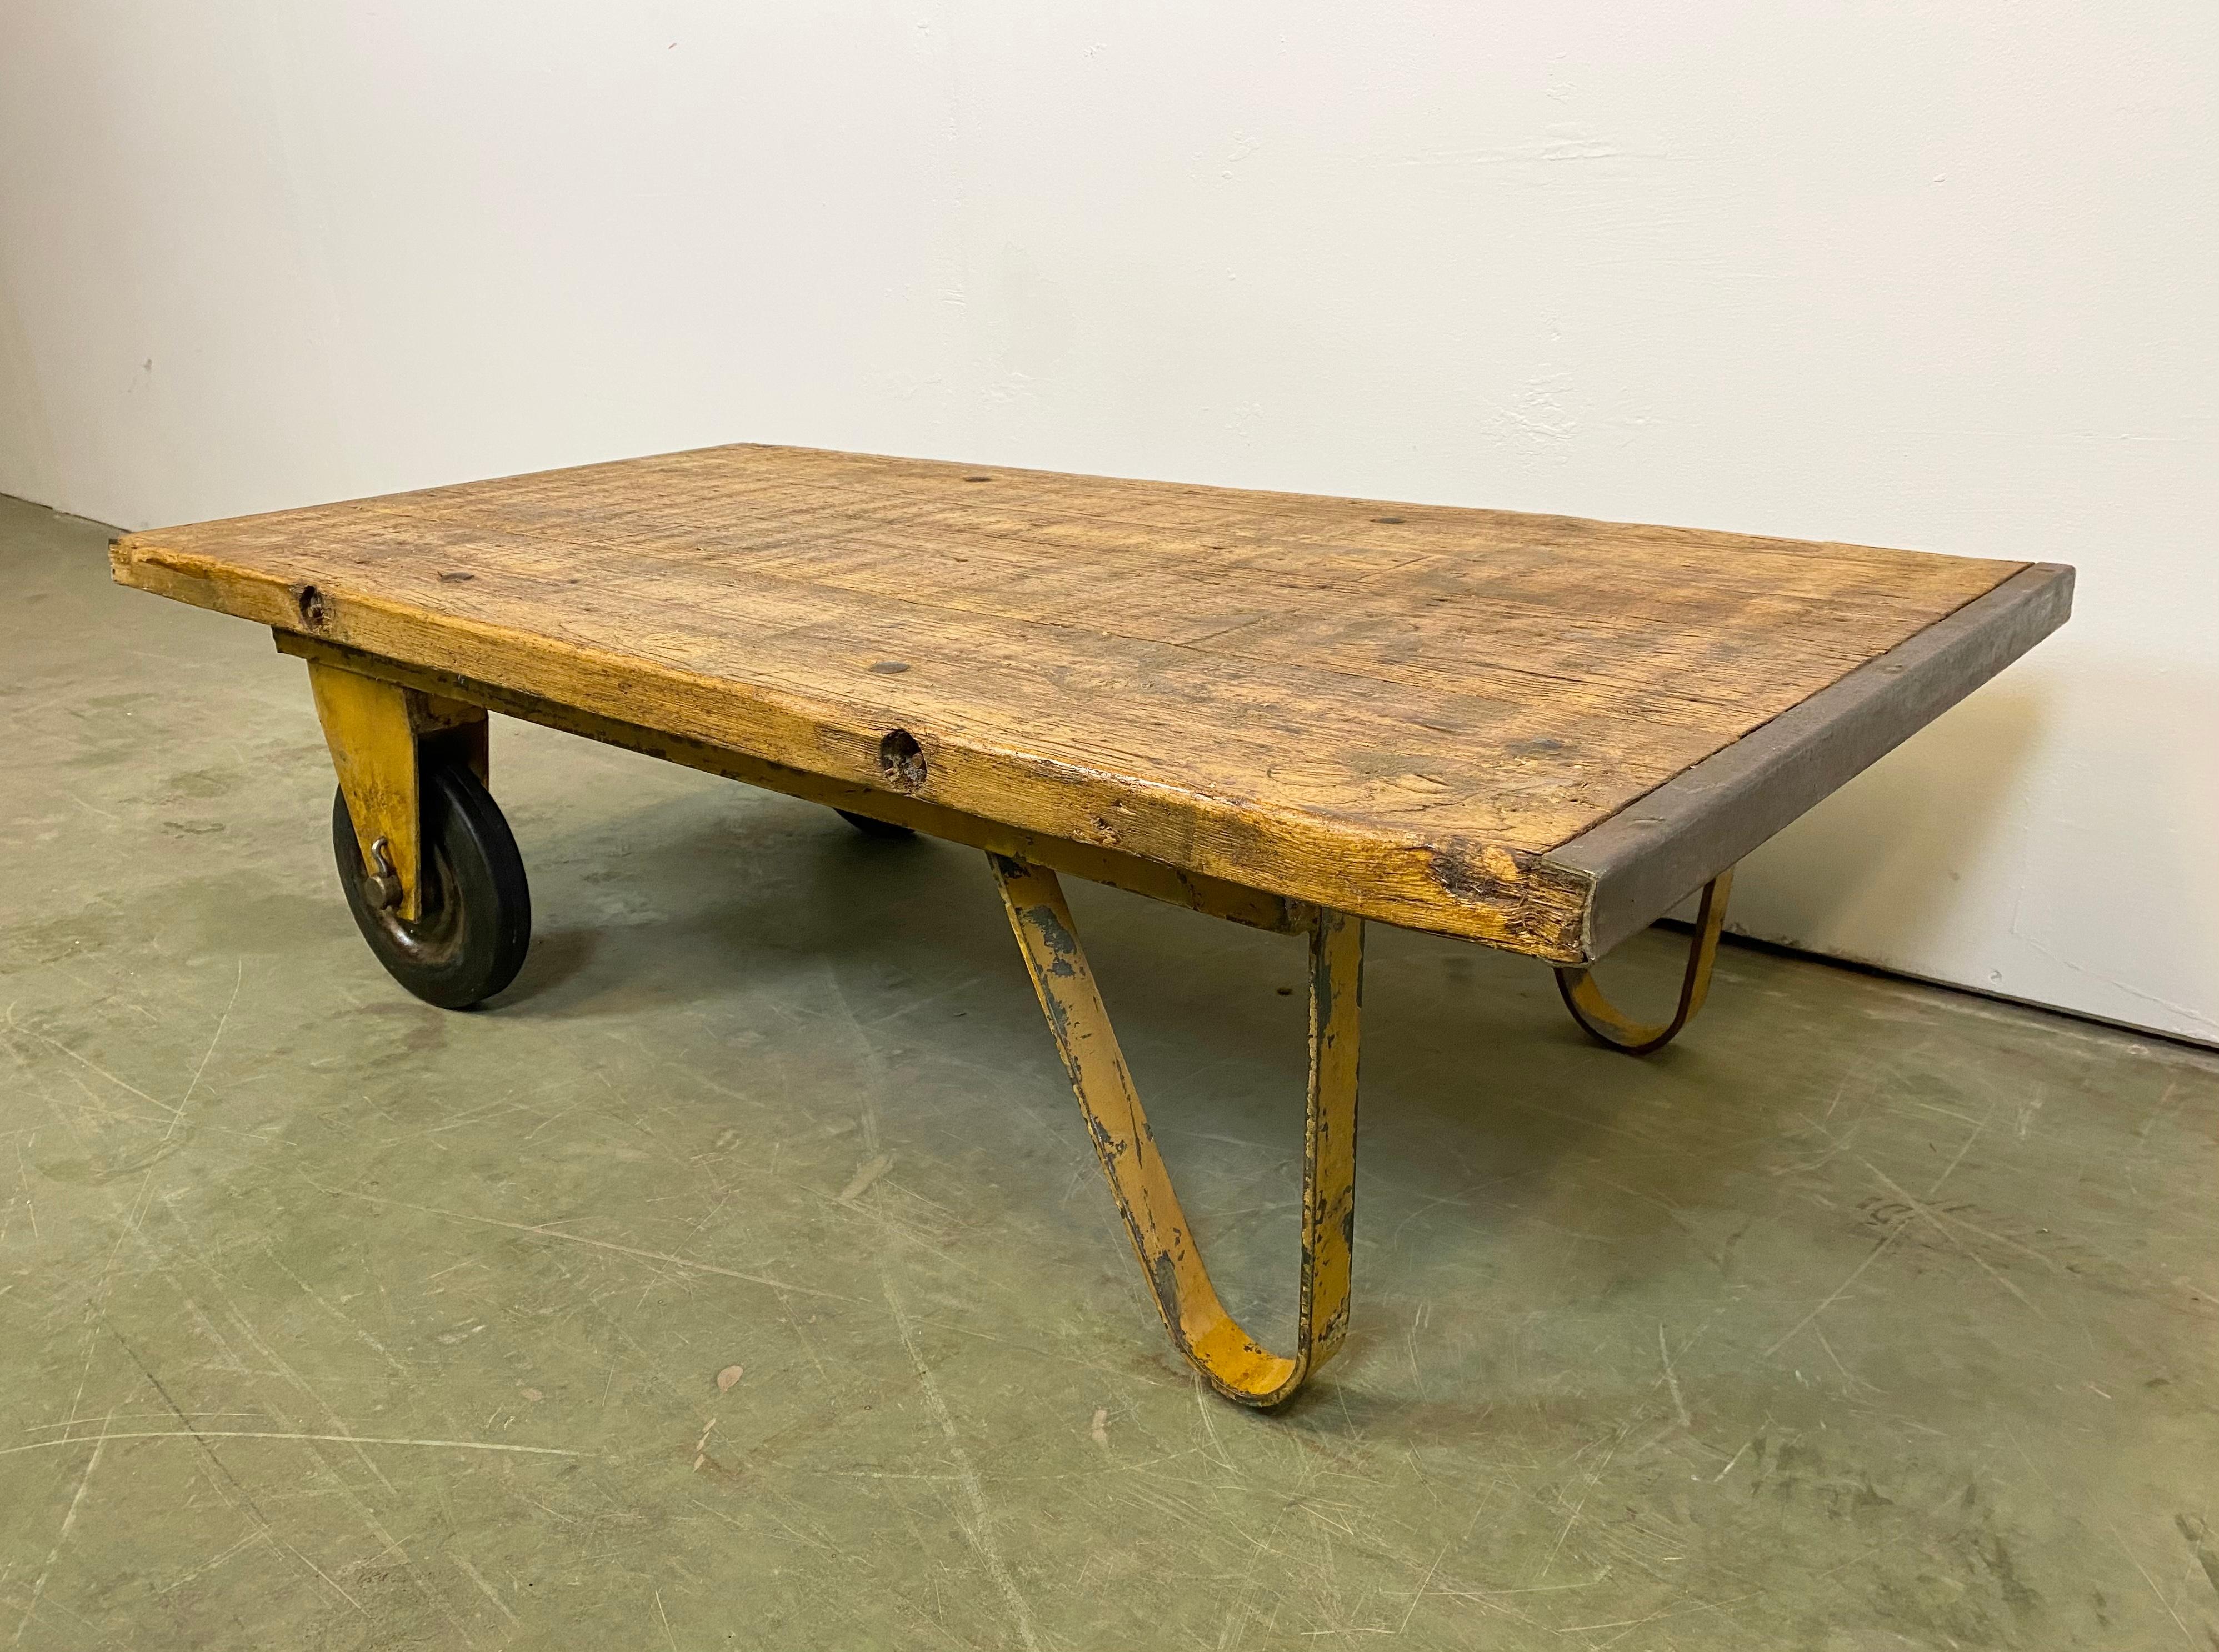 Former pallet truck from a factory now serves as a coffee table. It features a yellow iron construction with two wheels and a solid wooden plate. The weight of the table is 33 kg.